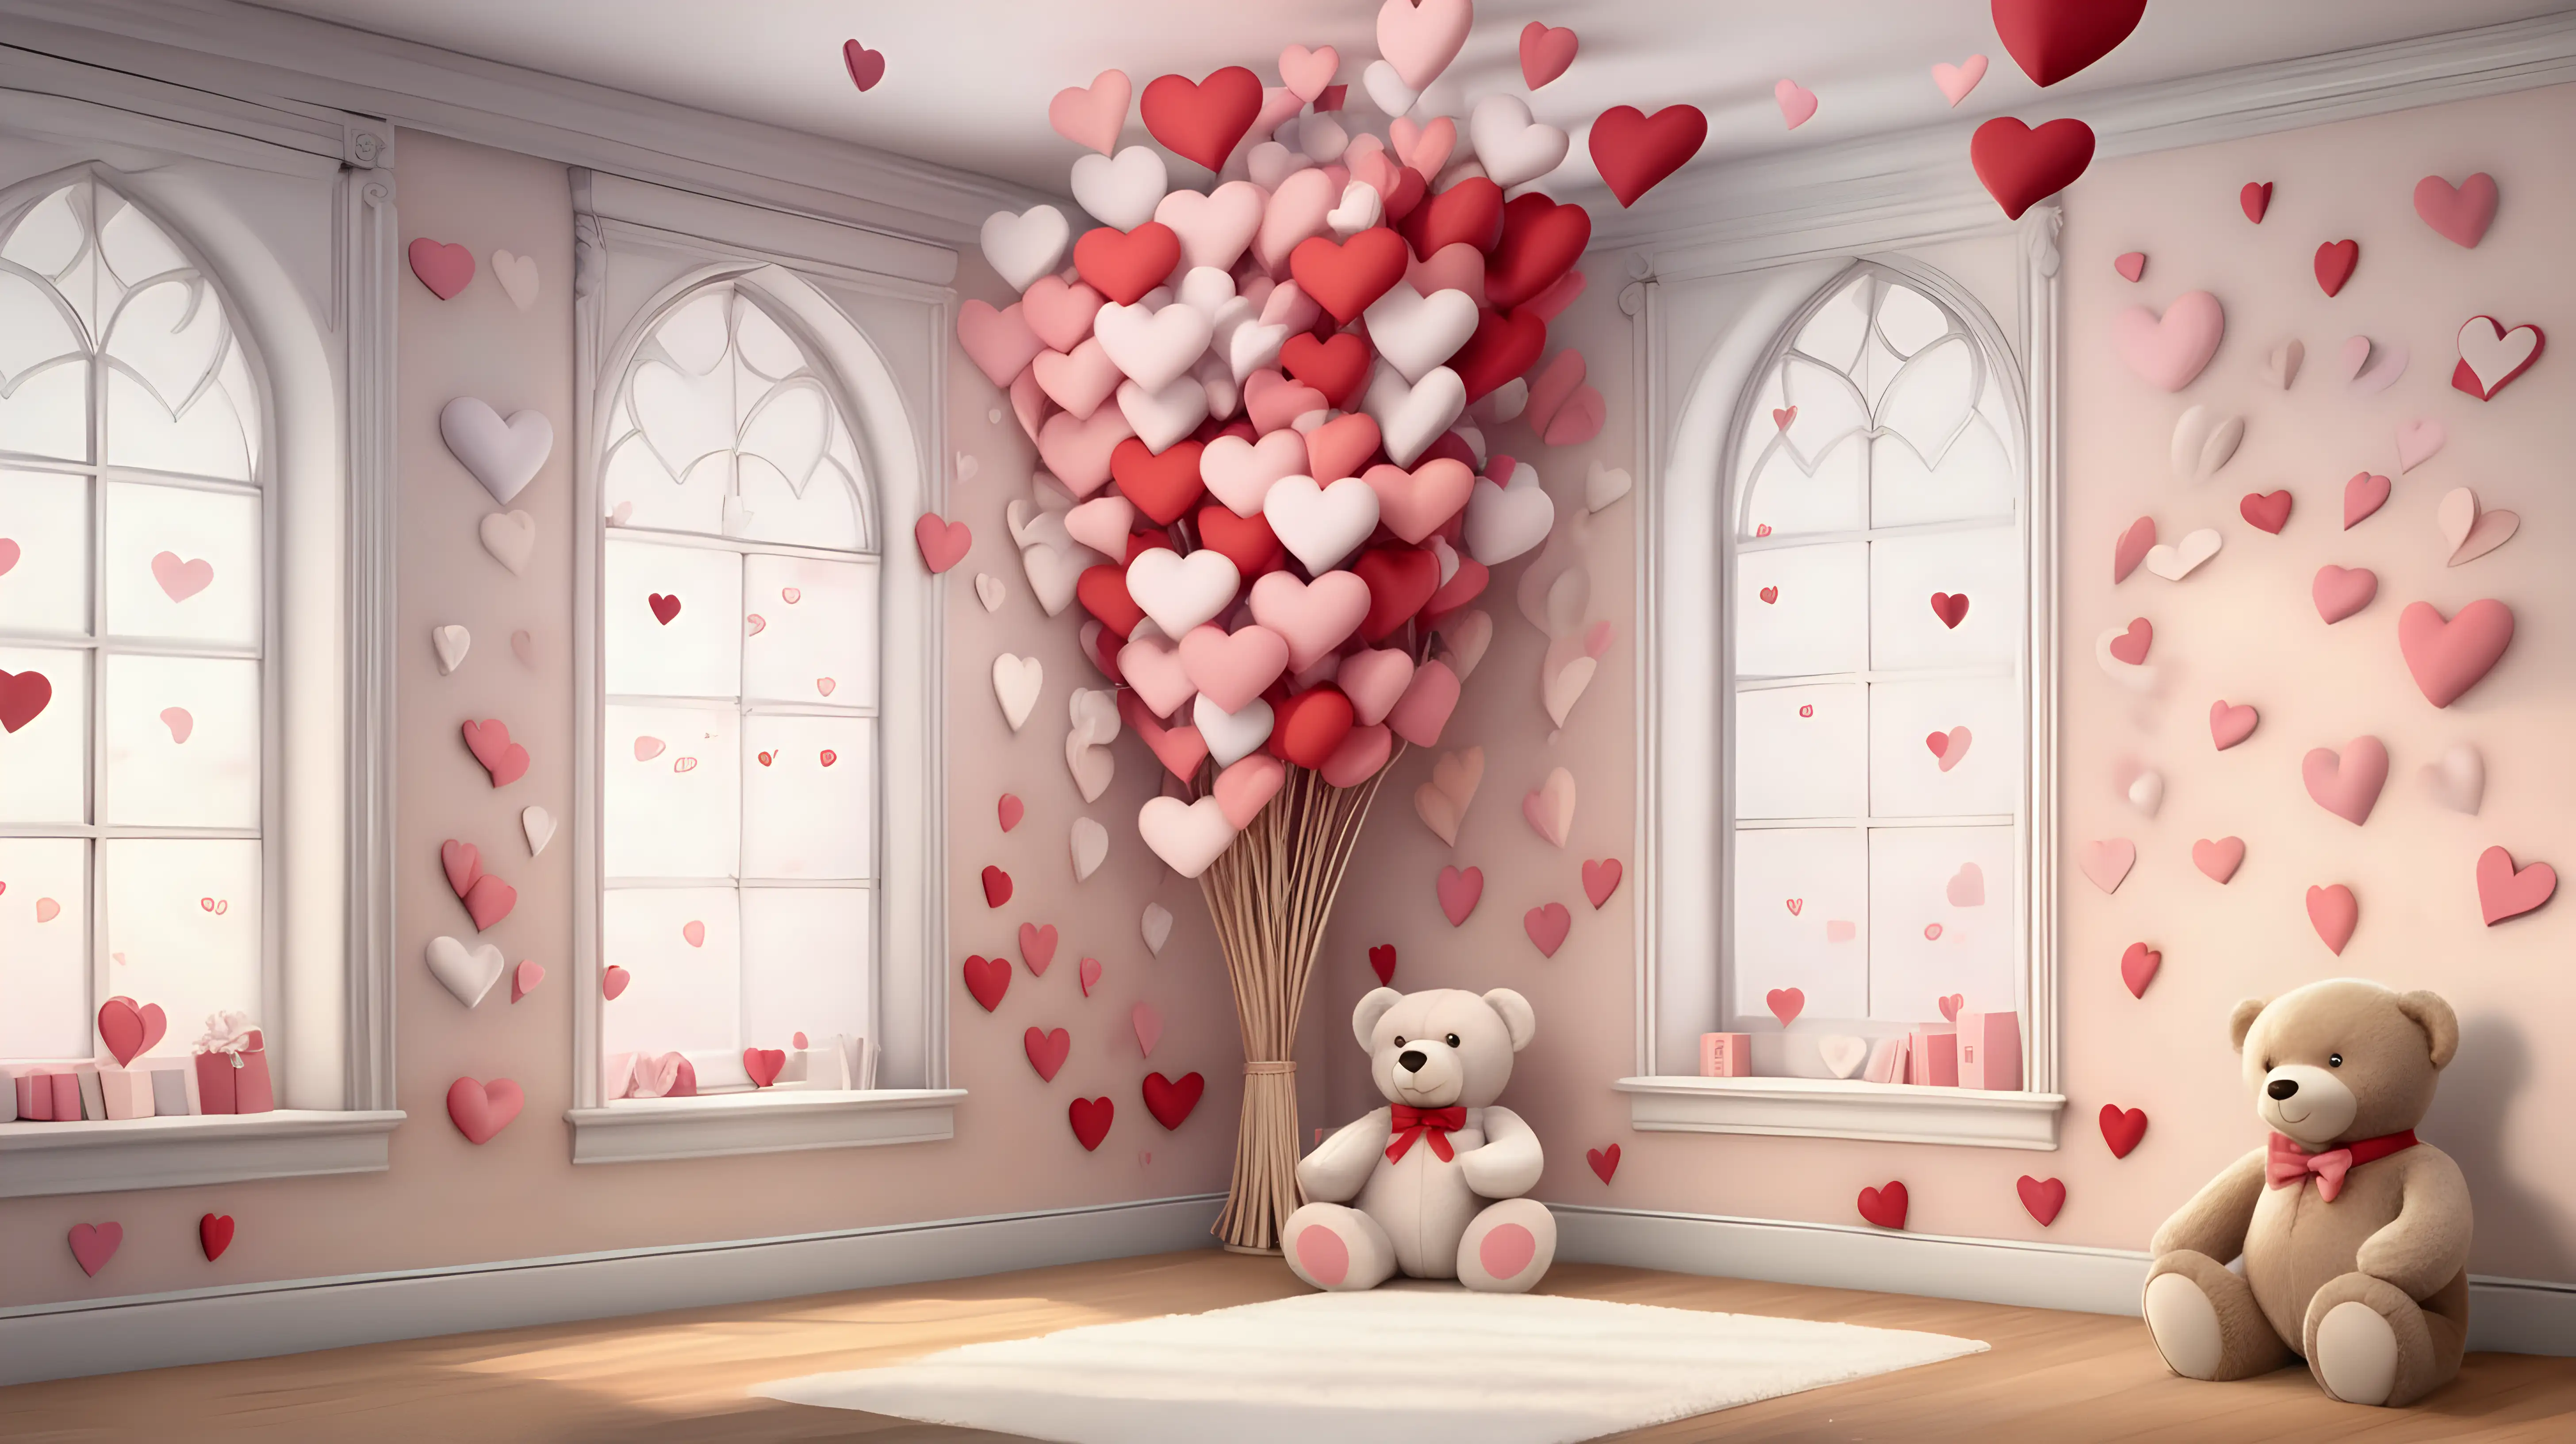 Romantic Blank Space Surrounded by Hearts and Teddy Bears